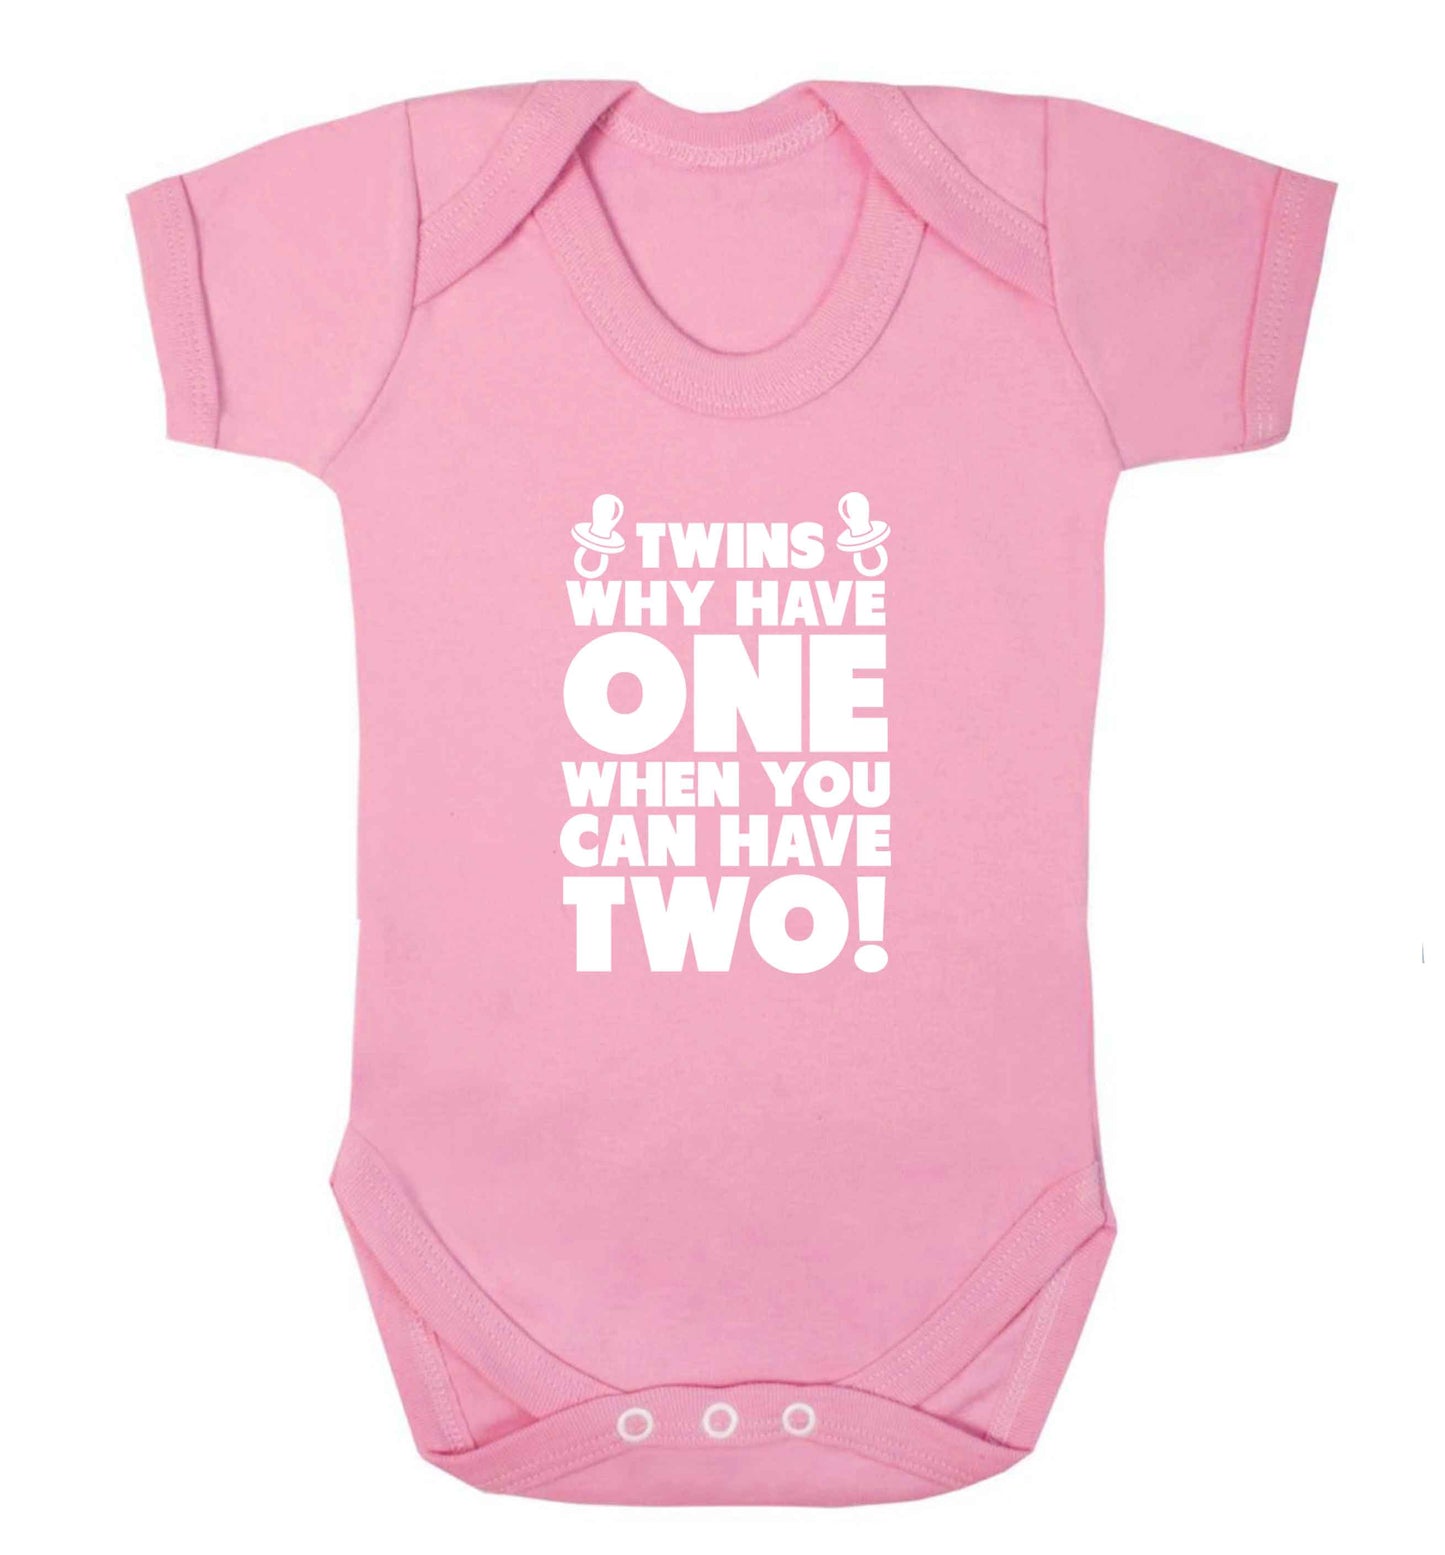 Twins why have one when you can have two baby vest pale pink 18-24 months